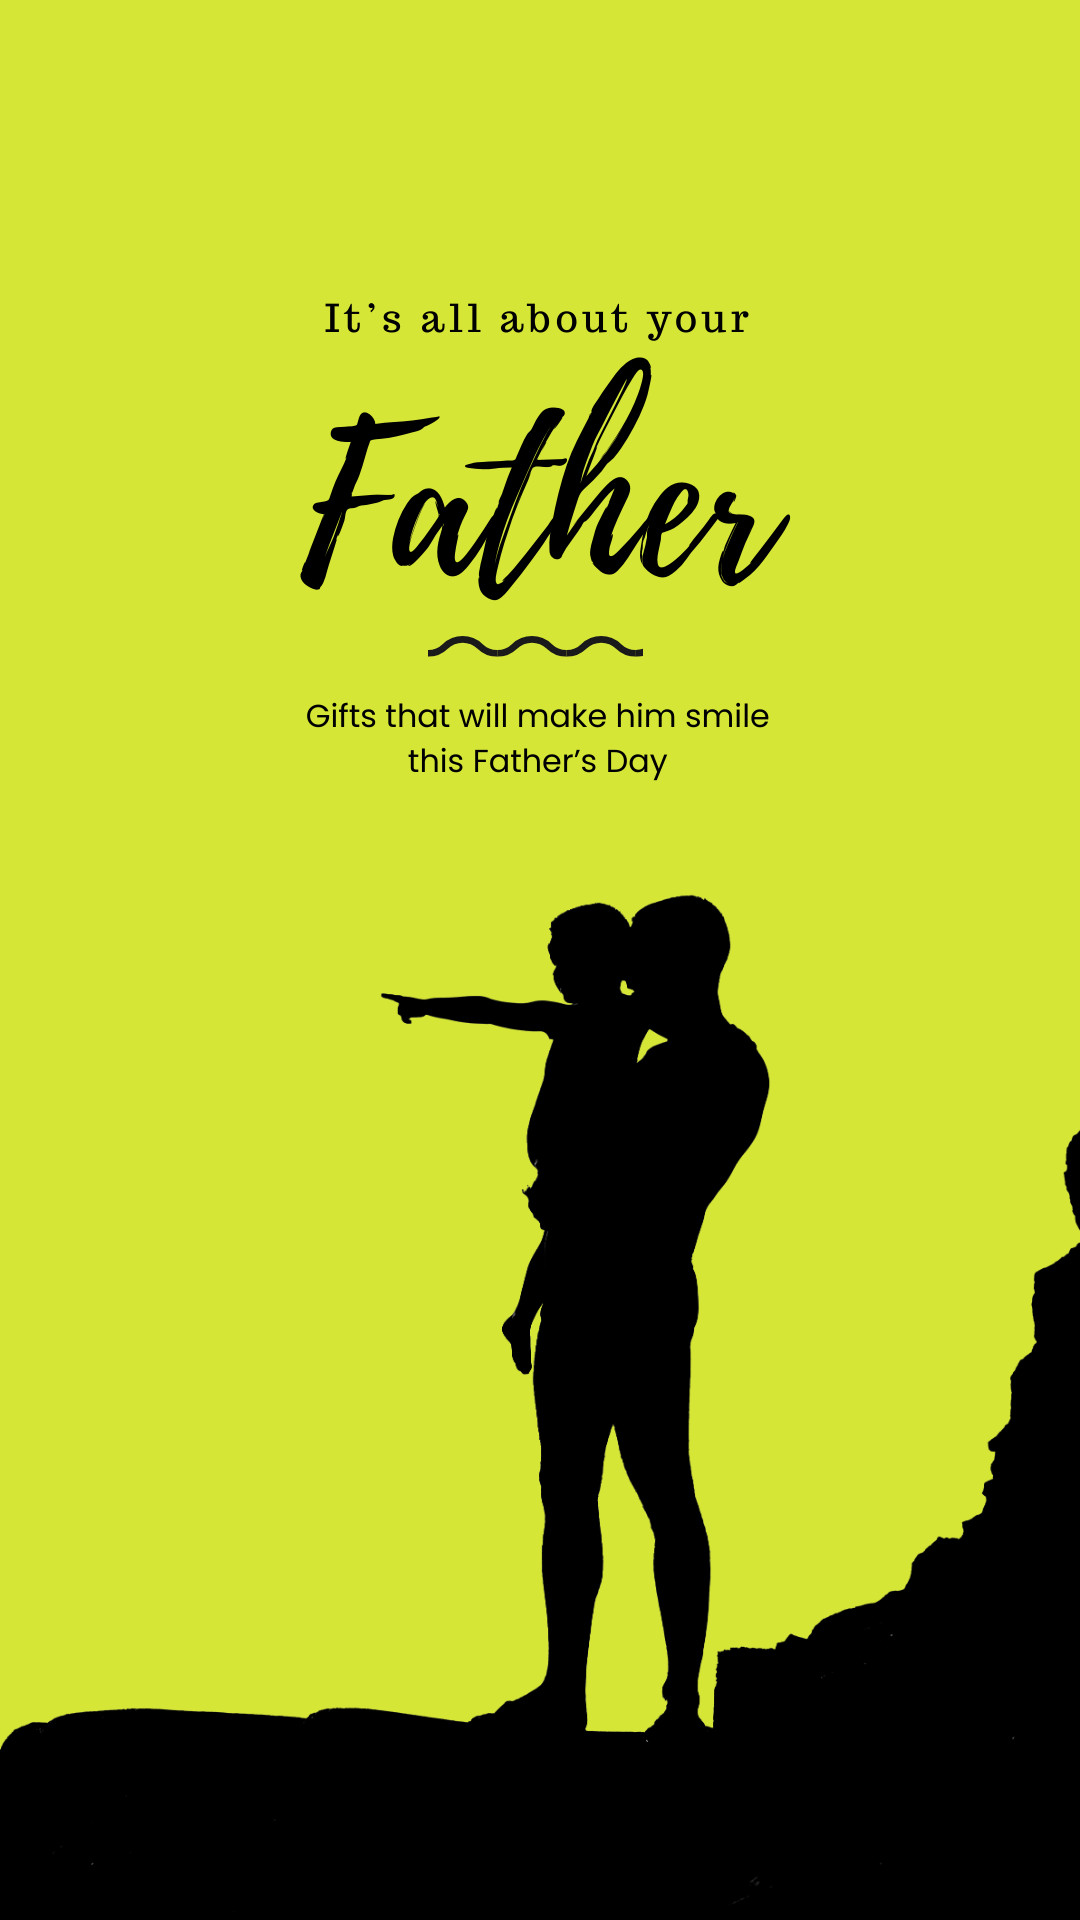 Black and Lime Father's Day Gifts Facebook Cover 820x360